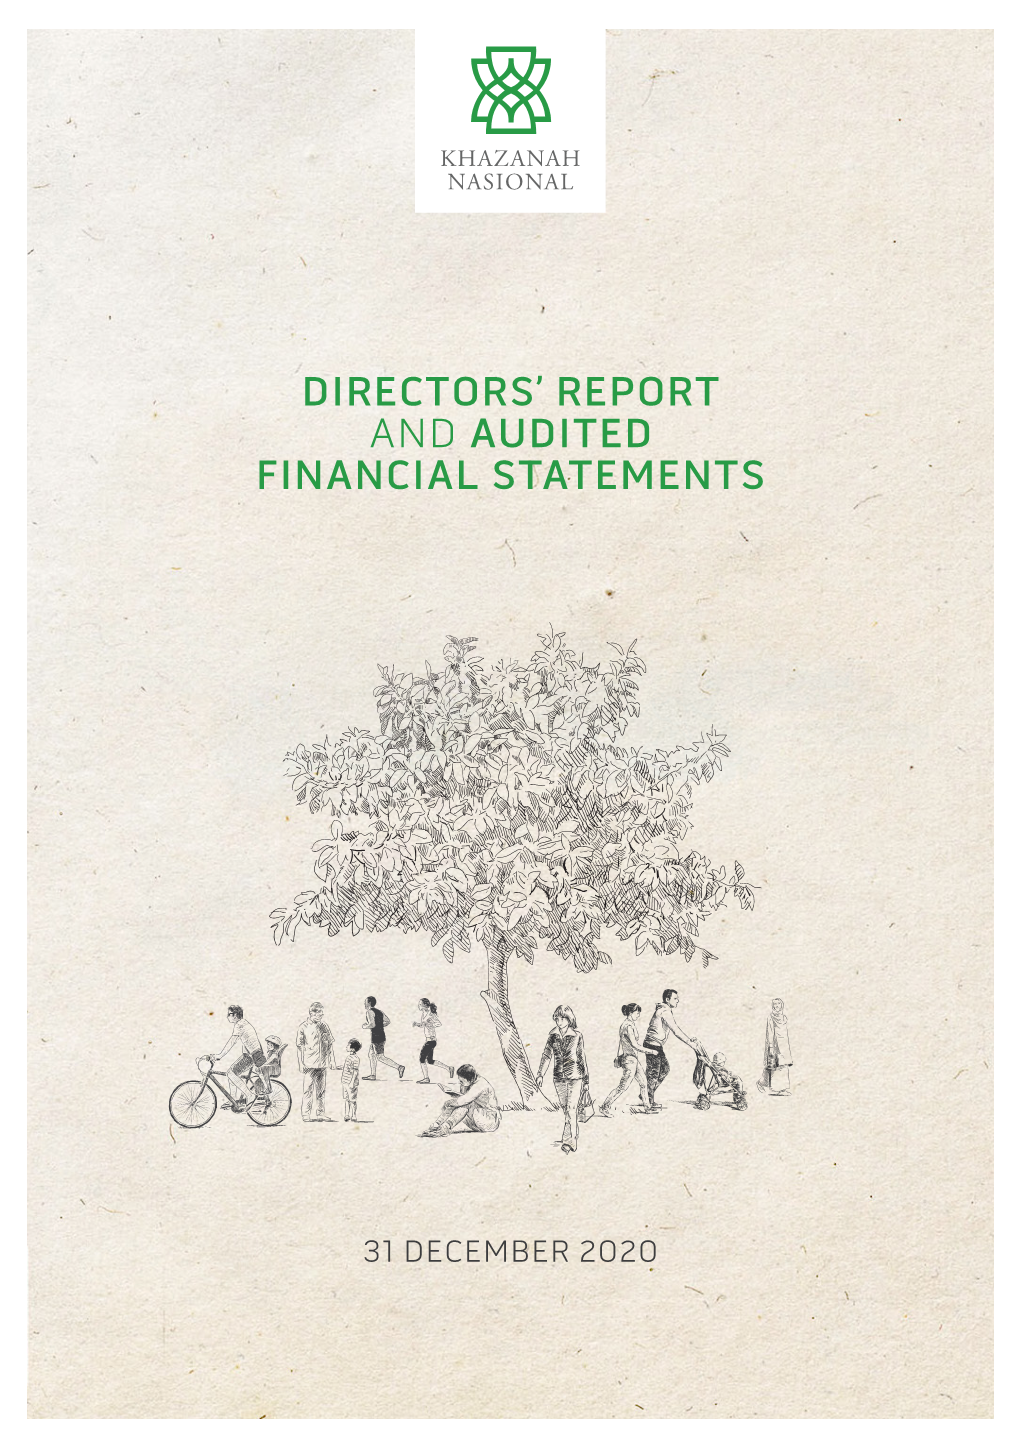 Directors' Report and Audited Financial Statements